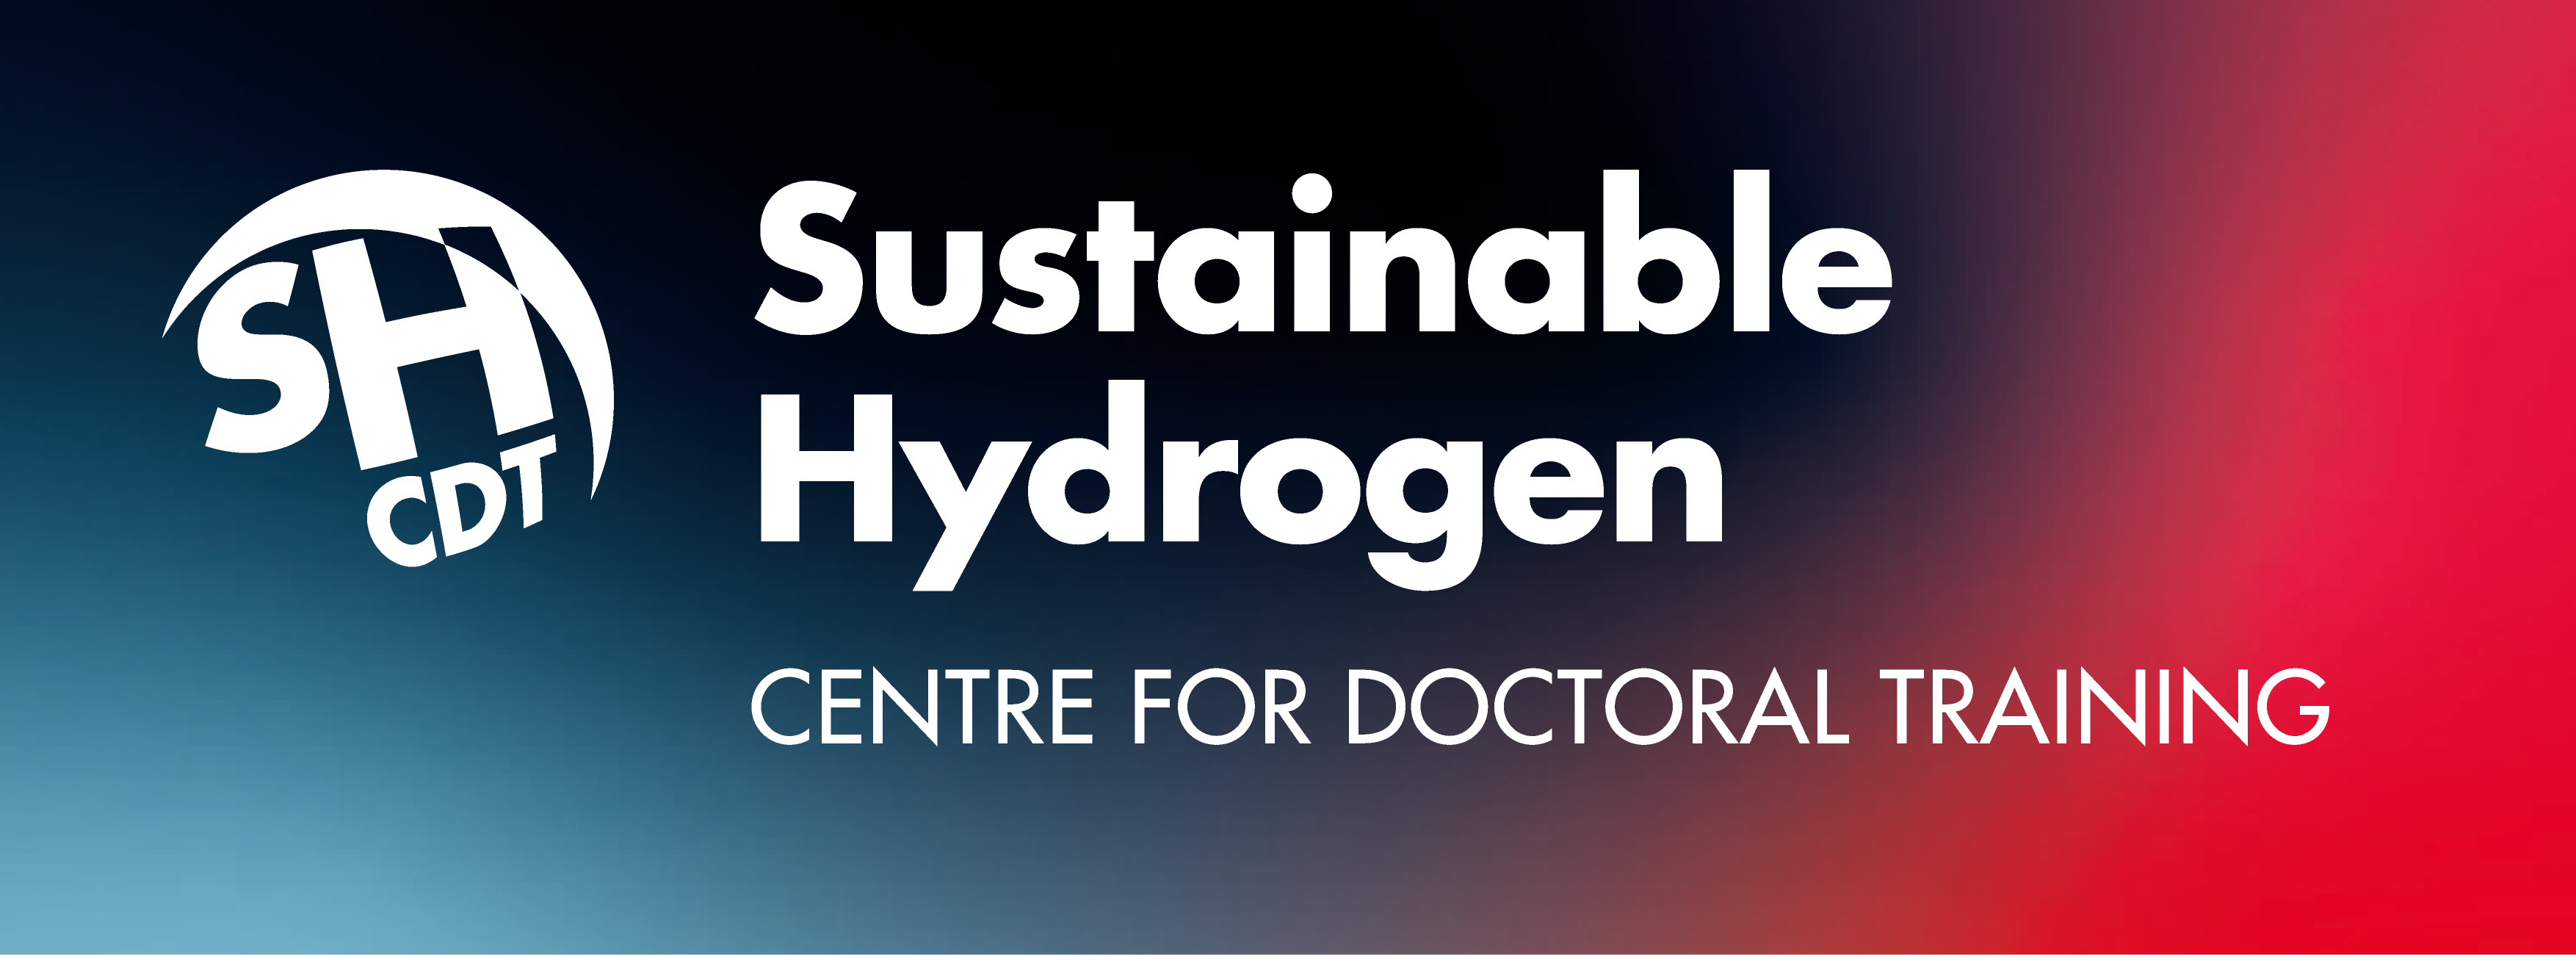 Logo with text 'Sustainable Hydrogen Centre of Doctoral Training'